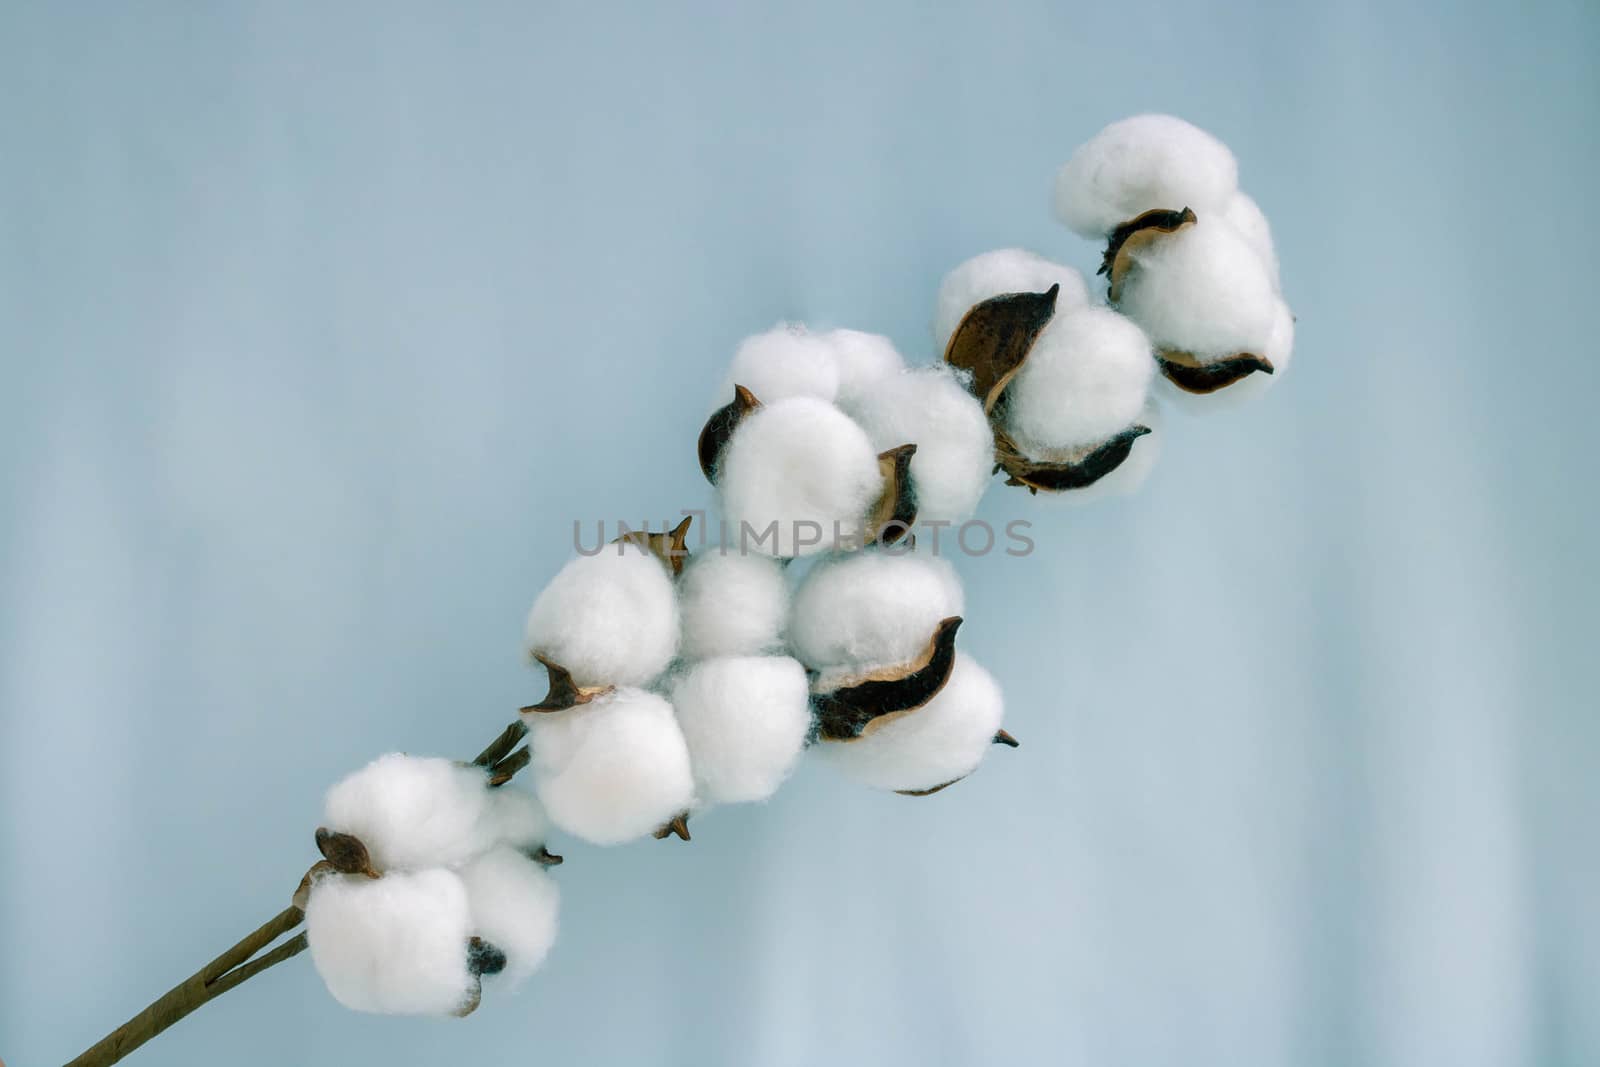 A sprig of cotton on a soft blue fabric by lapushka62